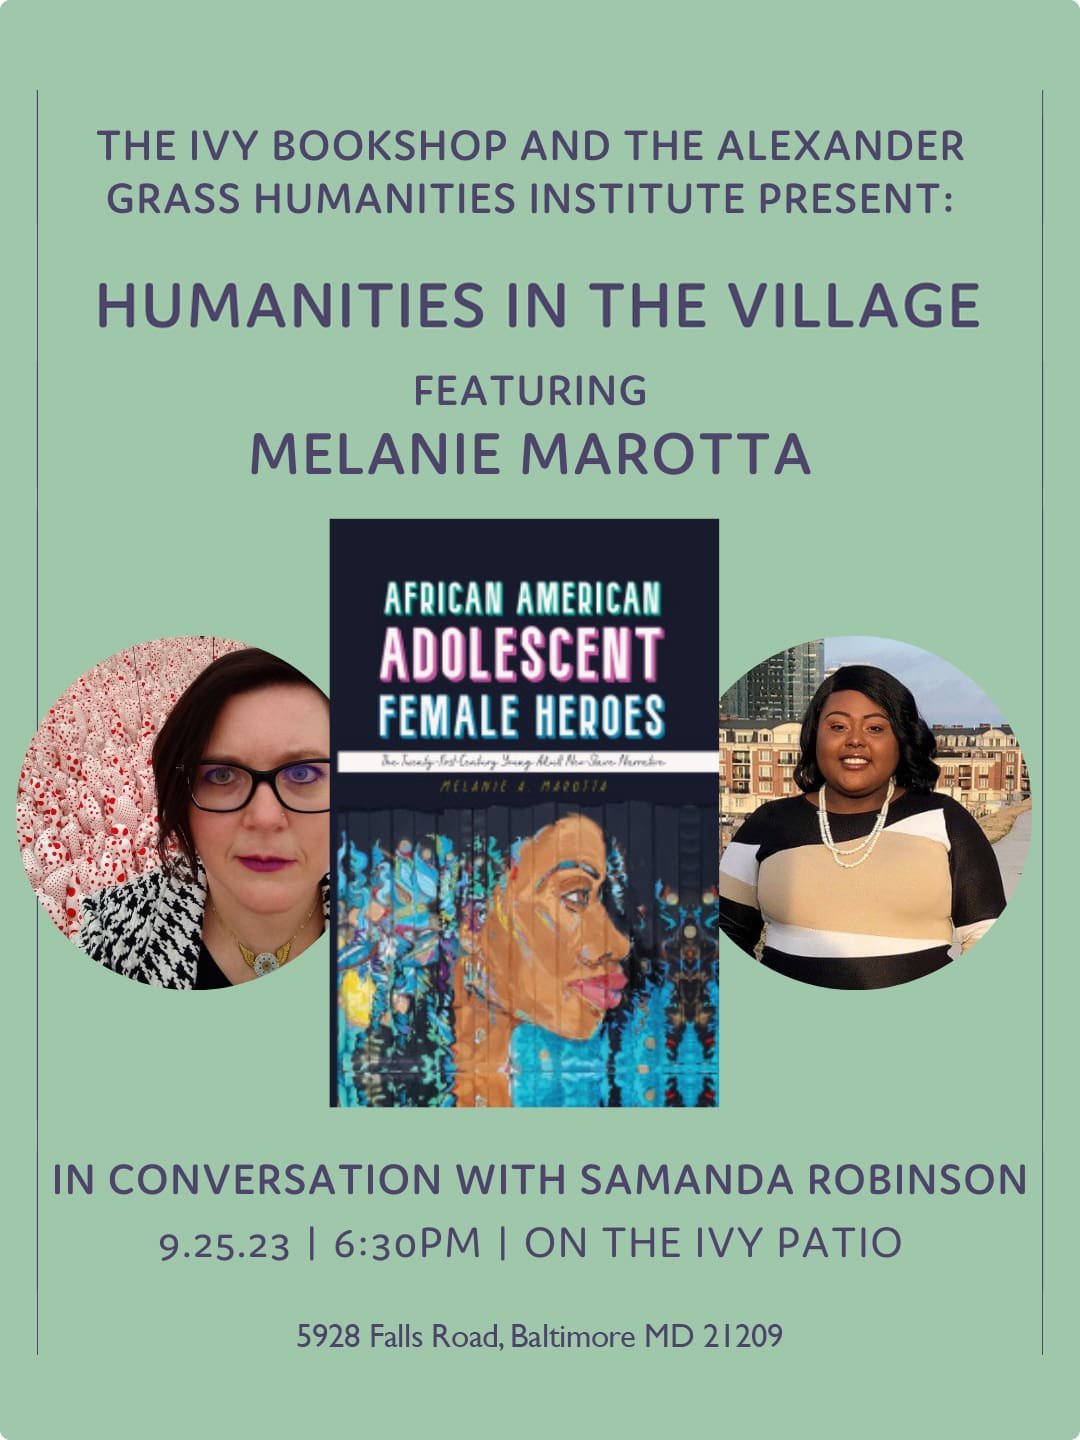 Flyer for Humanities in the Village featuring Melanie Marotta with Samanda Robinson, in conversation at the Ivy on September 25.